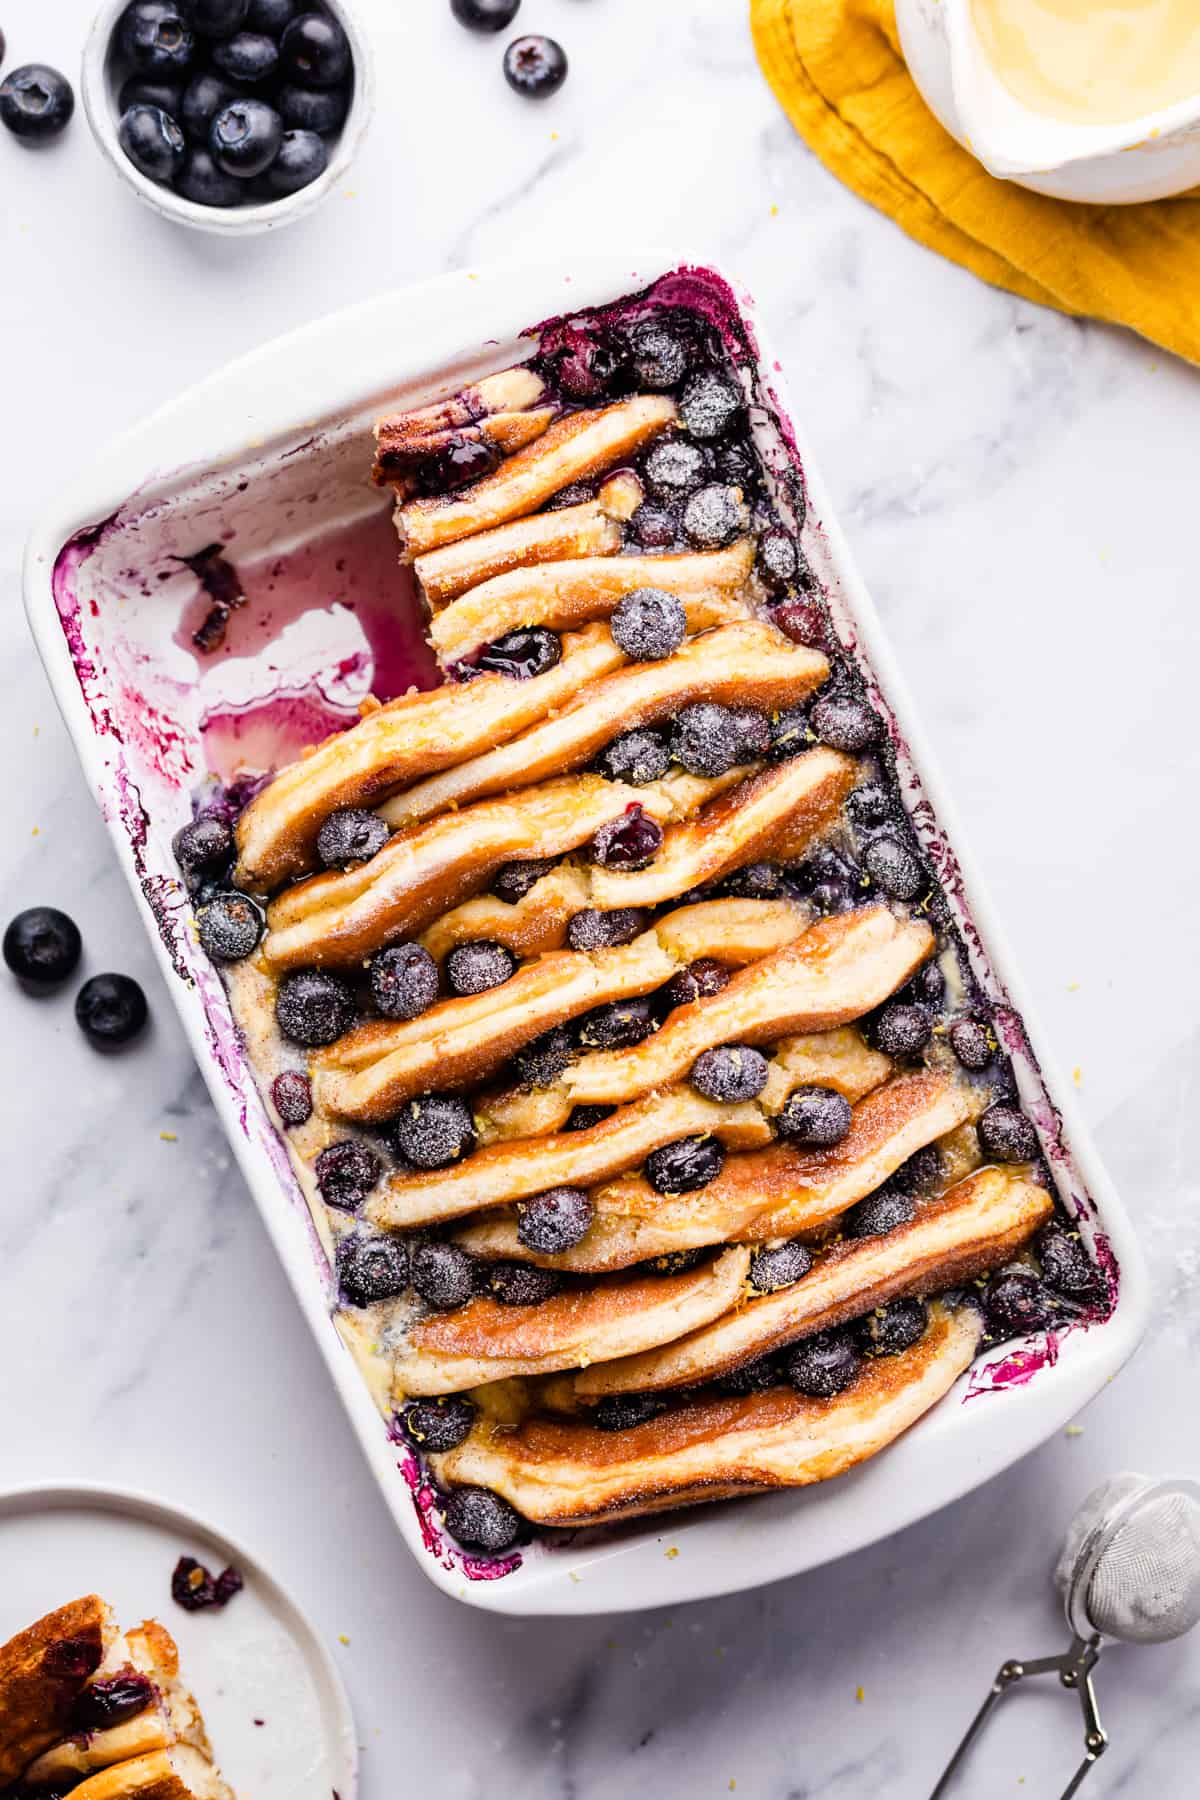 blueberry pancake casserole dusted with icing sugar and with a portion cut out.